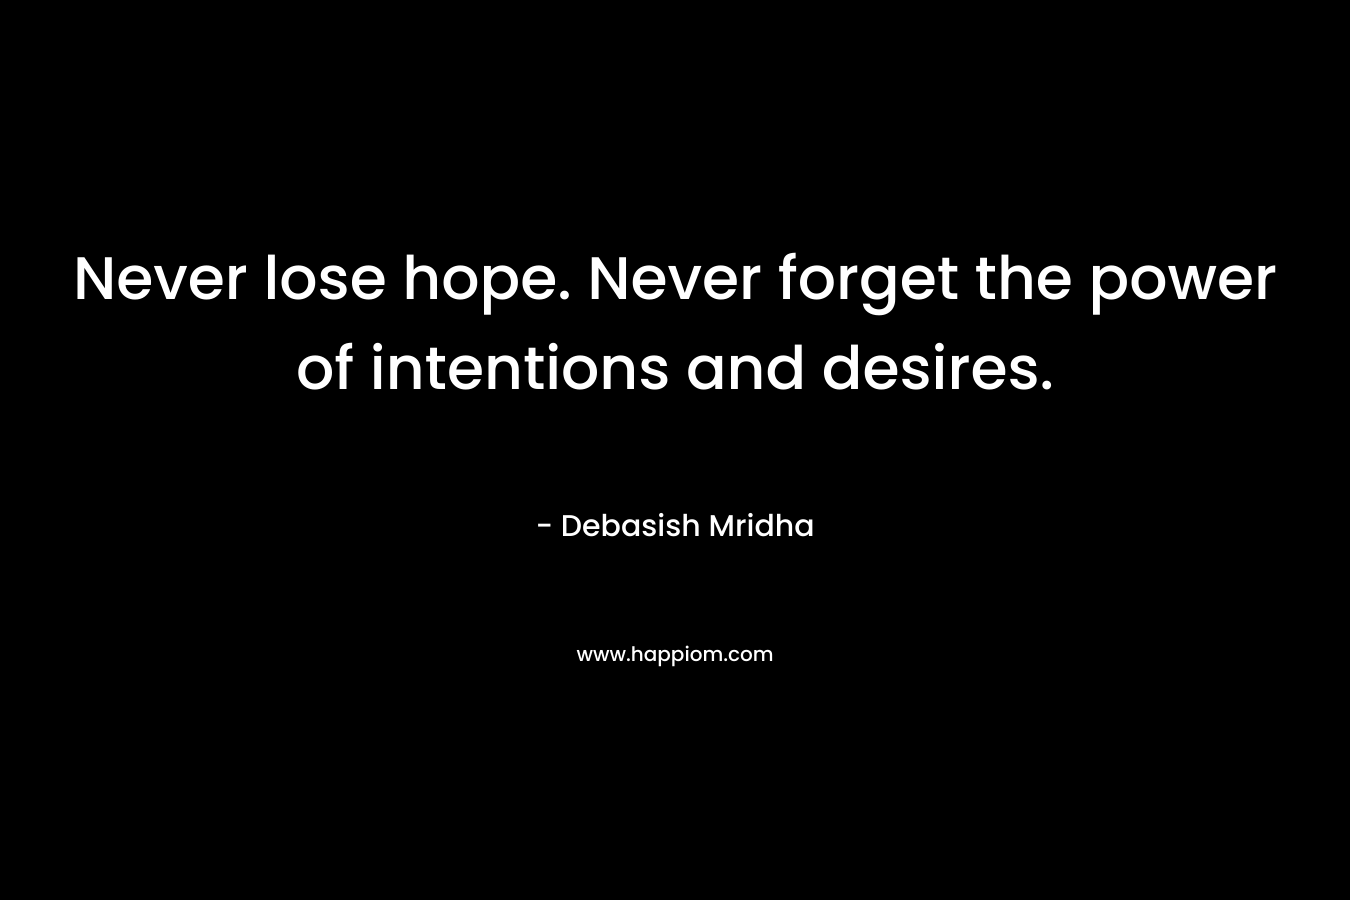 Never lose hope. Never forget the power of intentions and desires.